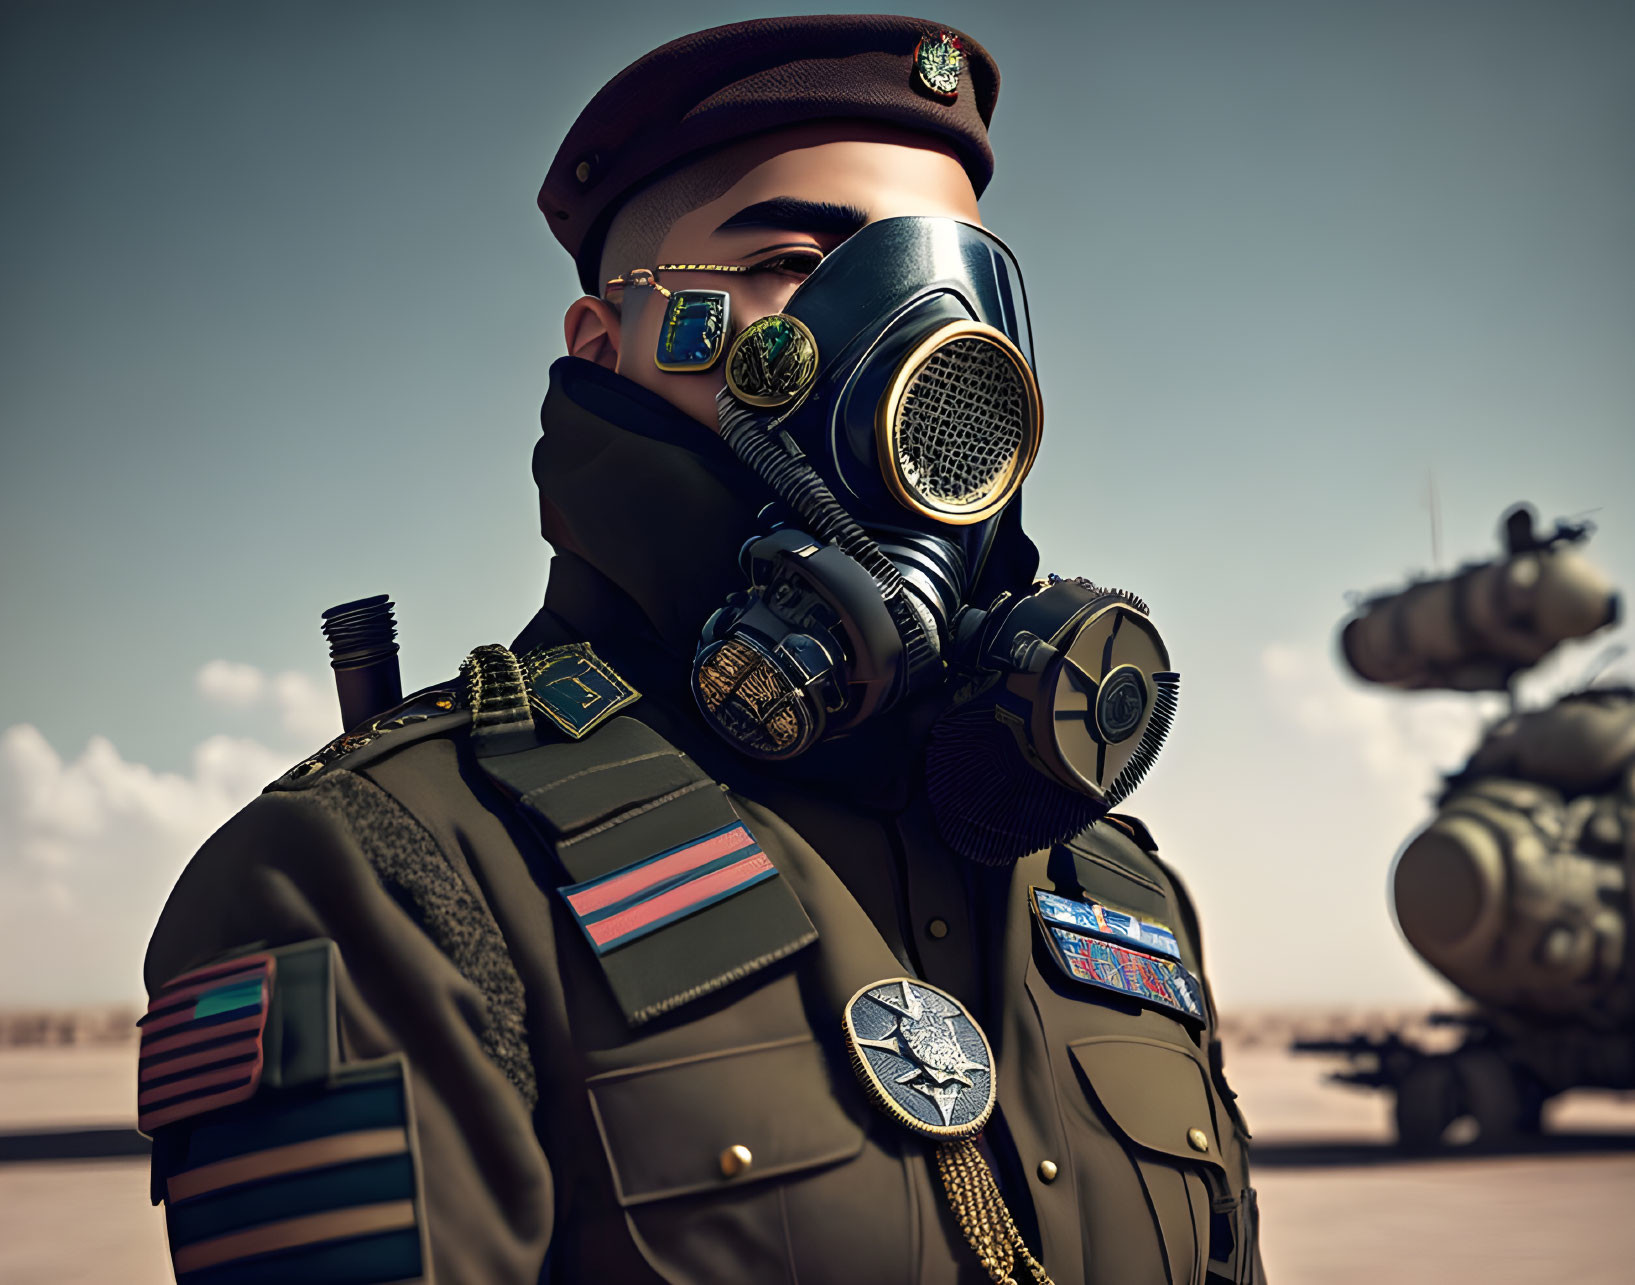 Decorated soldier in beret and gas mask at desert military base with helicopter.